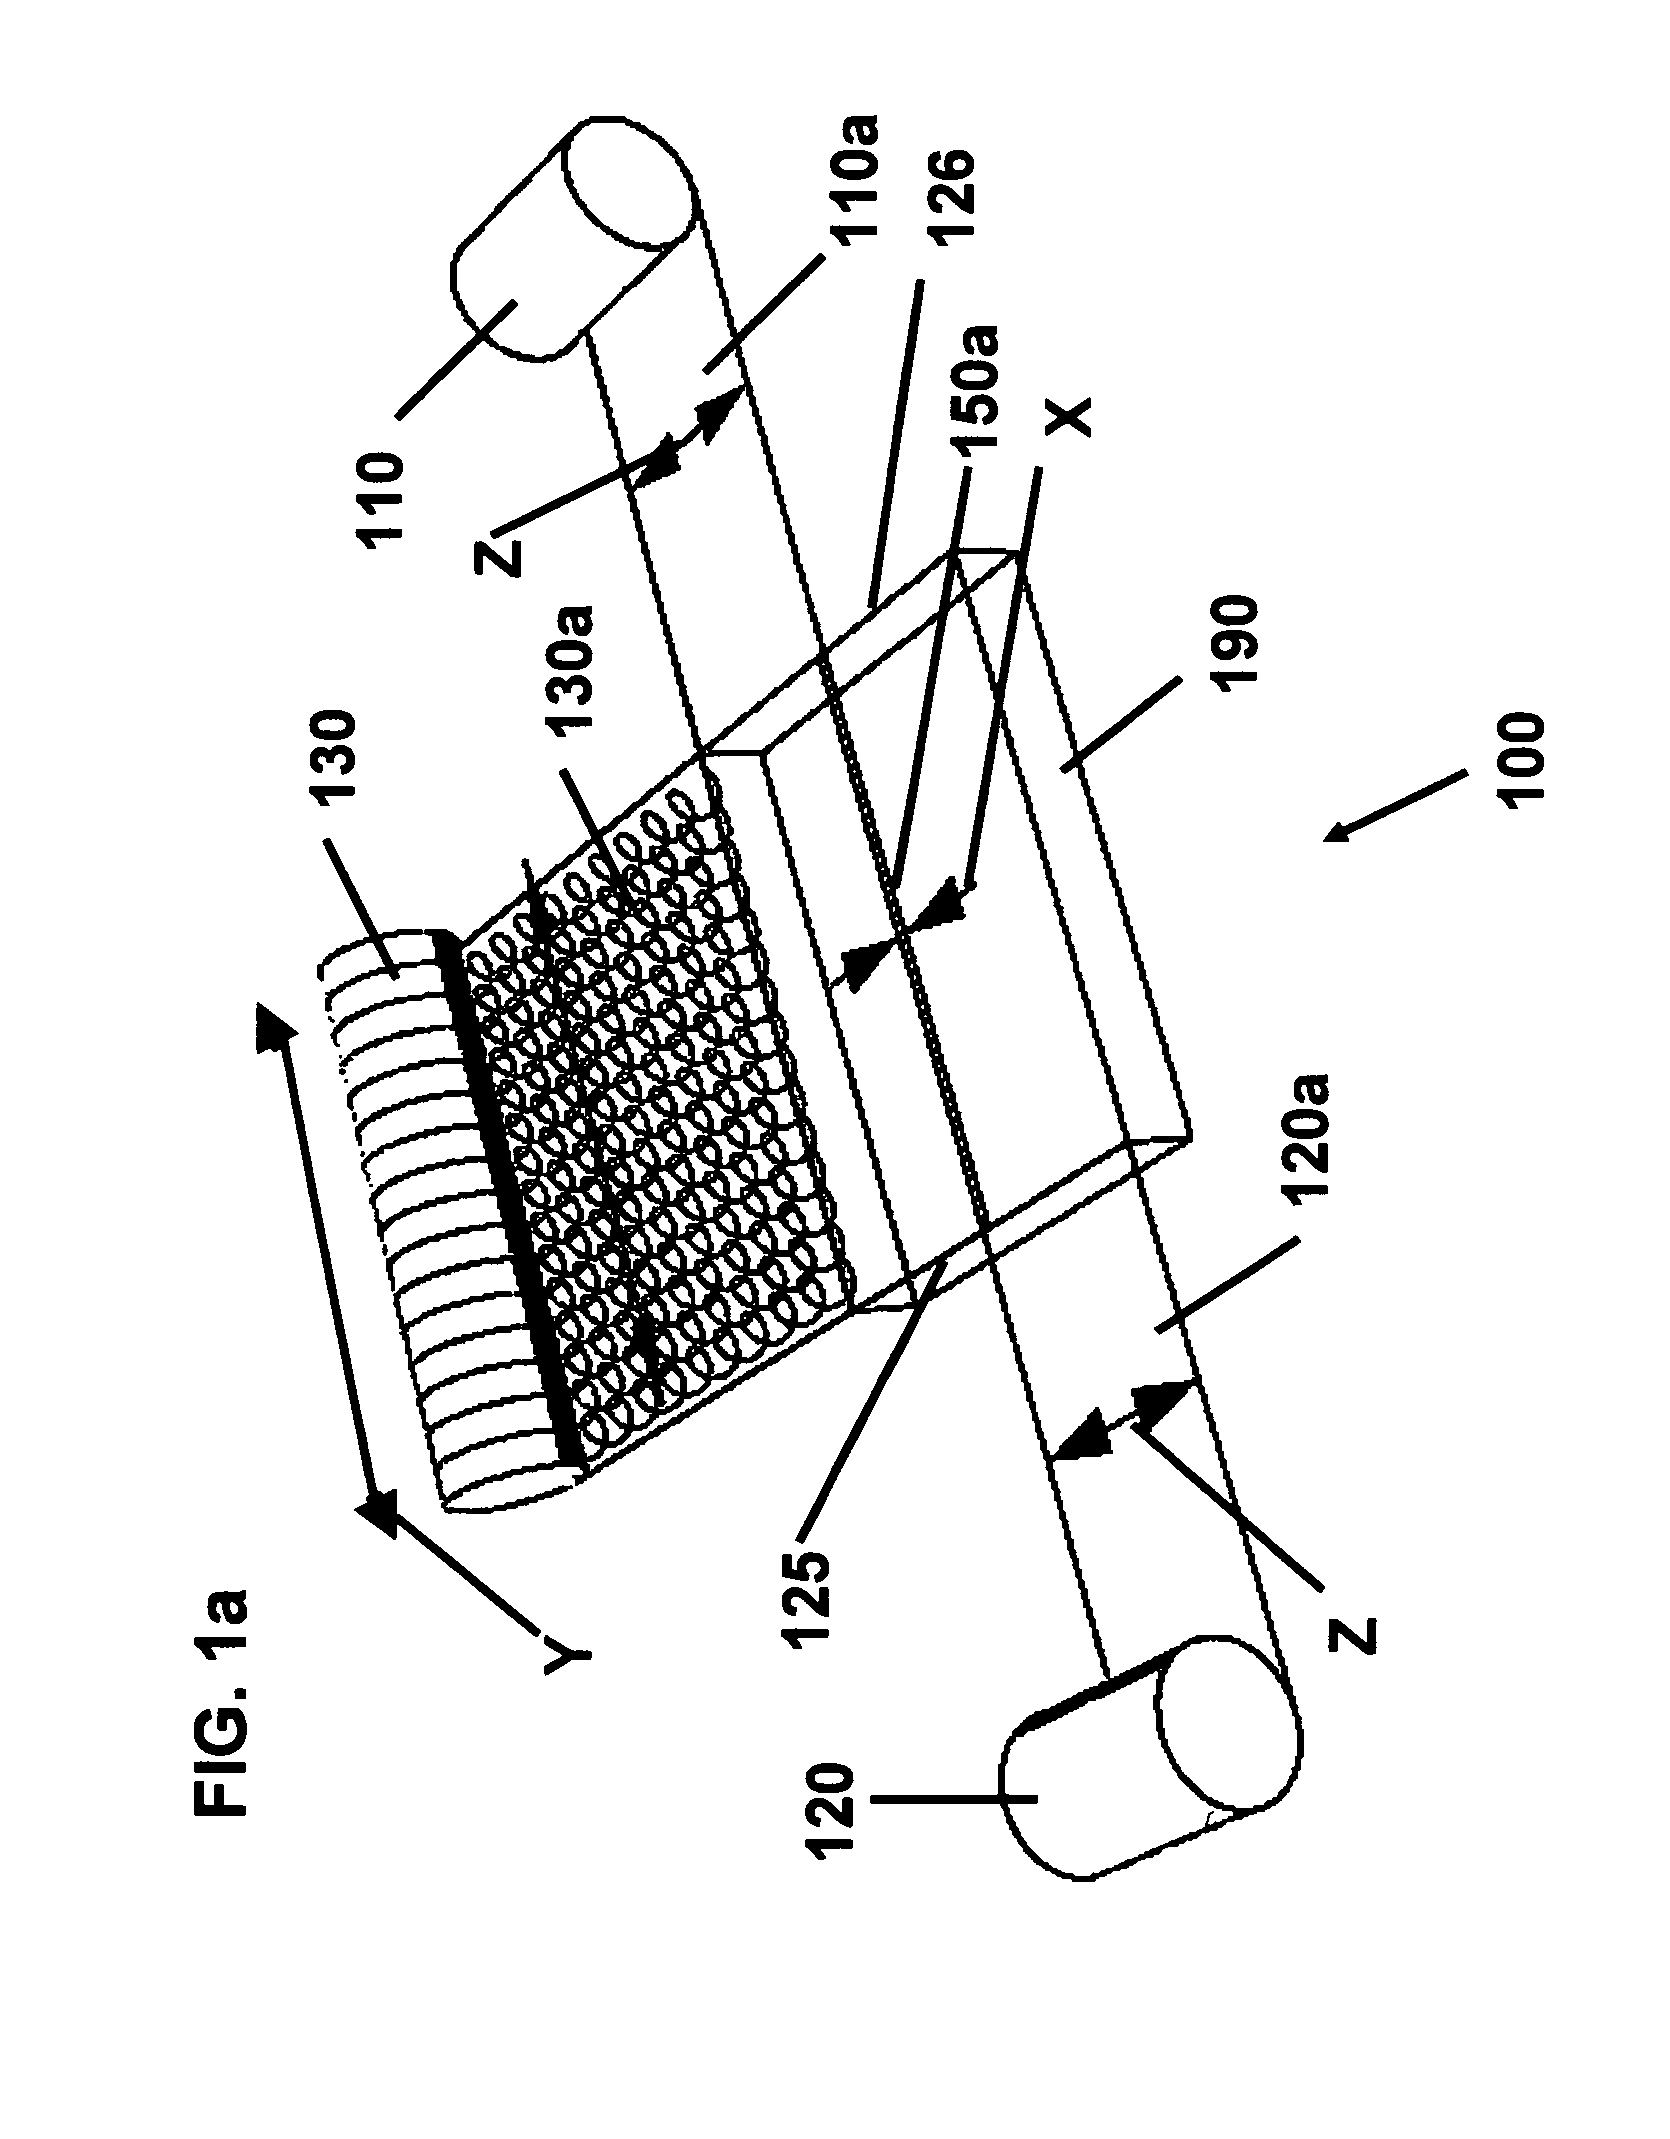 Counter-flow membrane plate exchanger and method of making